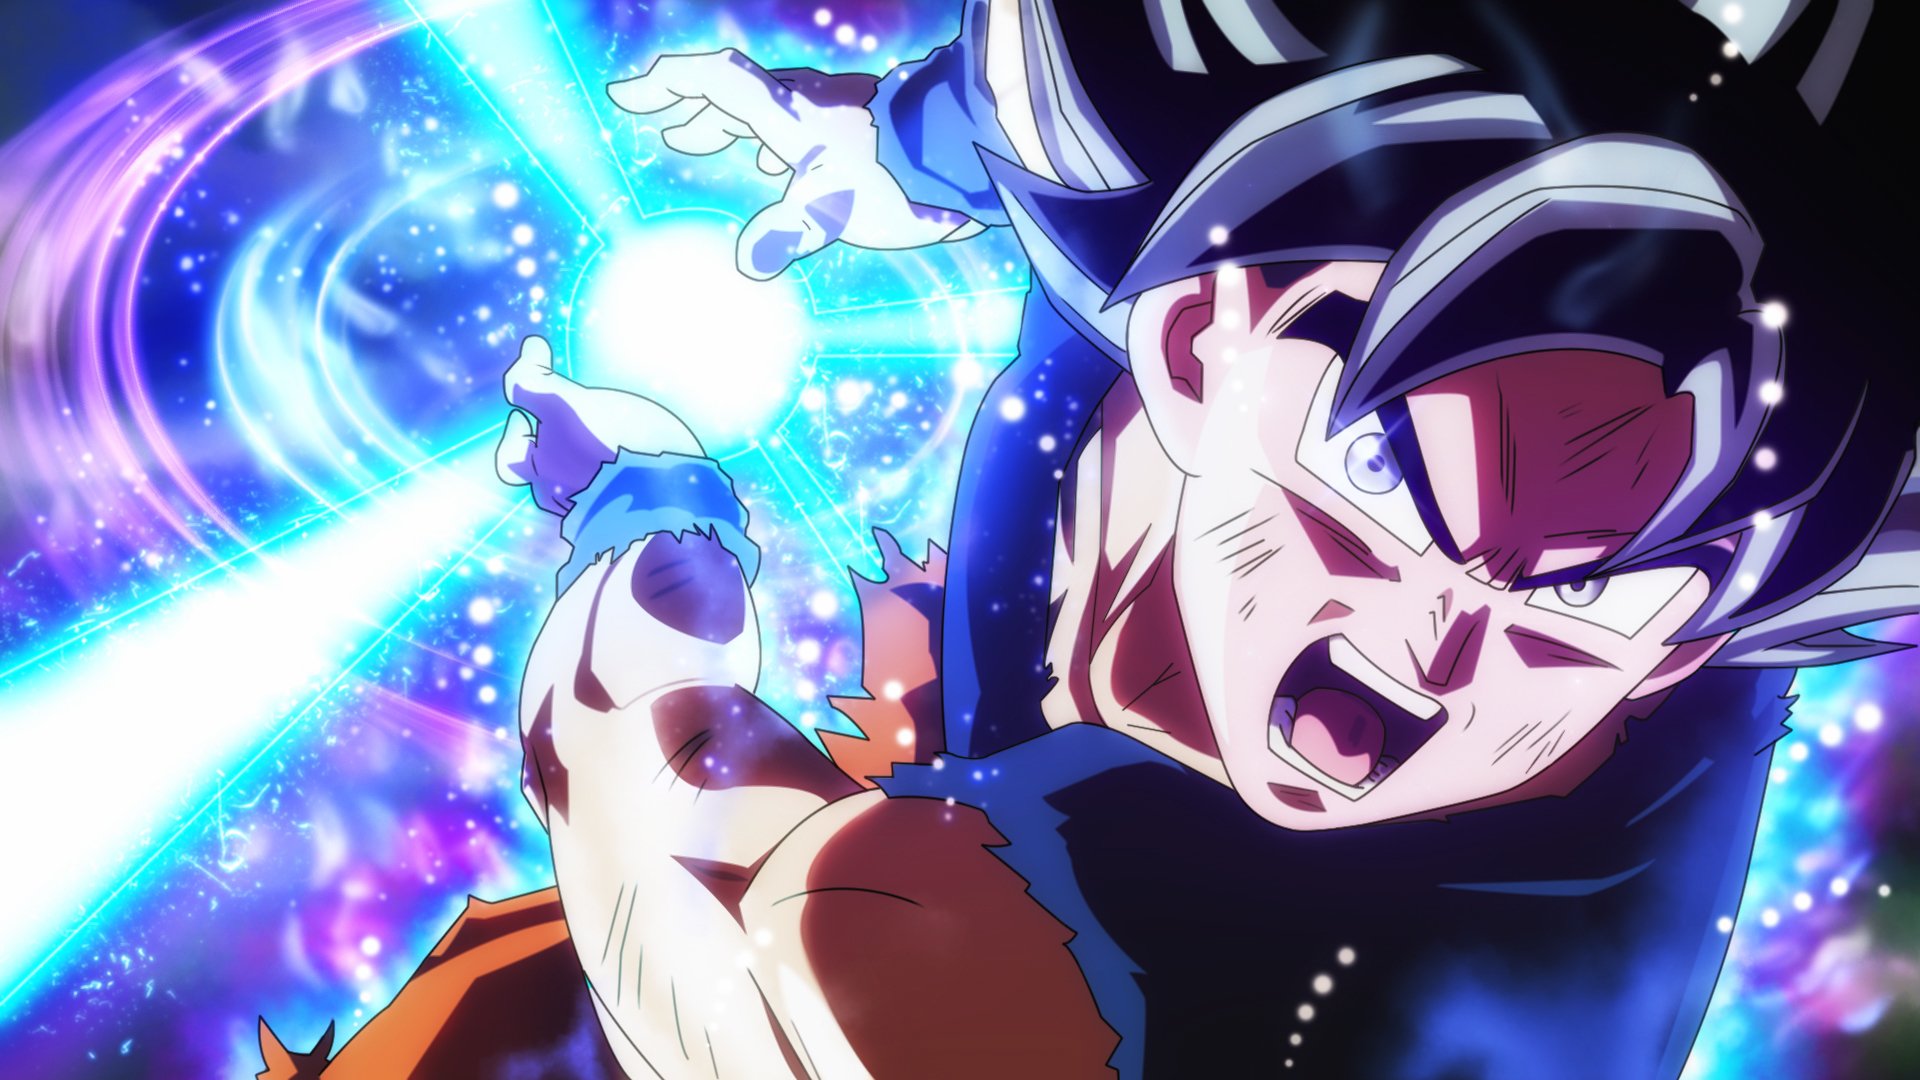 Dragon Ball Super Chapter 59 Release Date, Spoilers Moro has Secret Powers to Fight Goku's Technique